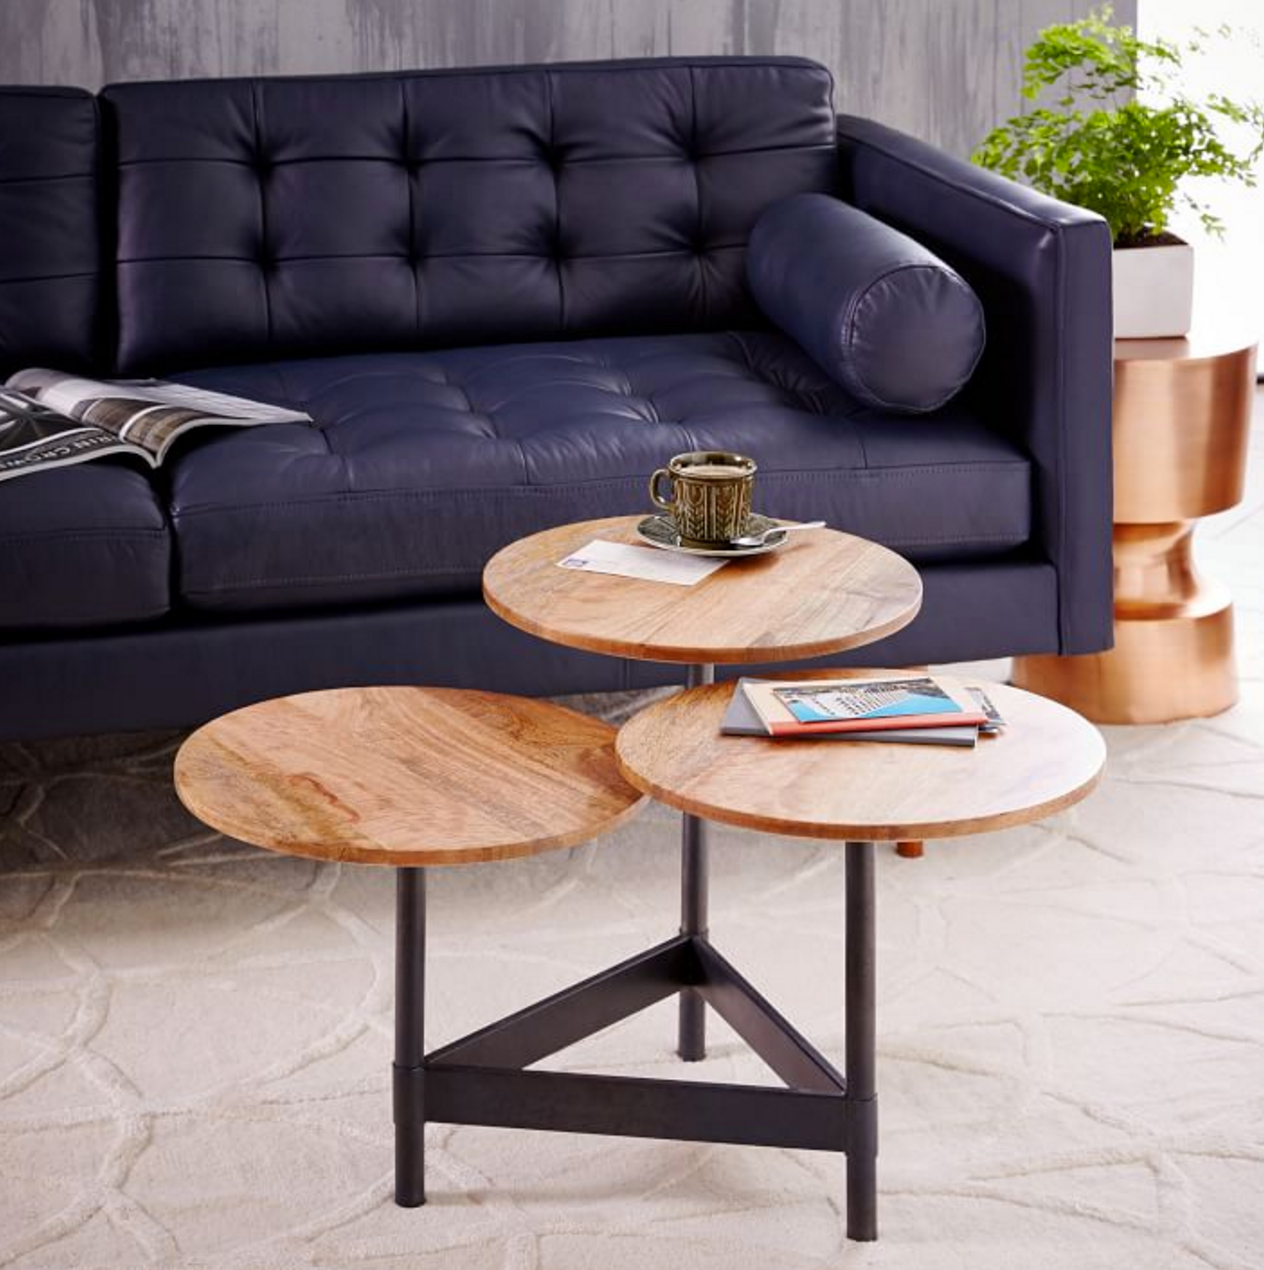 14 Super Chic Coffee Tables Under $200 That Will Work In Any Living Room
